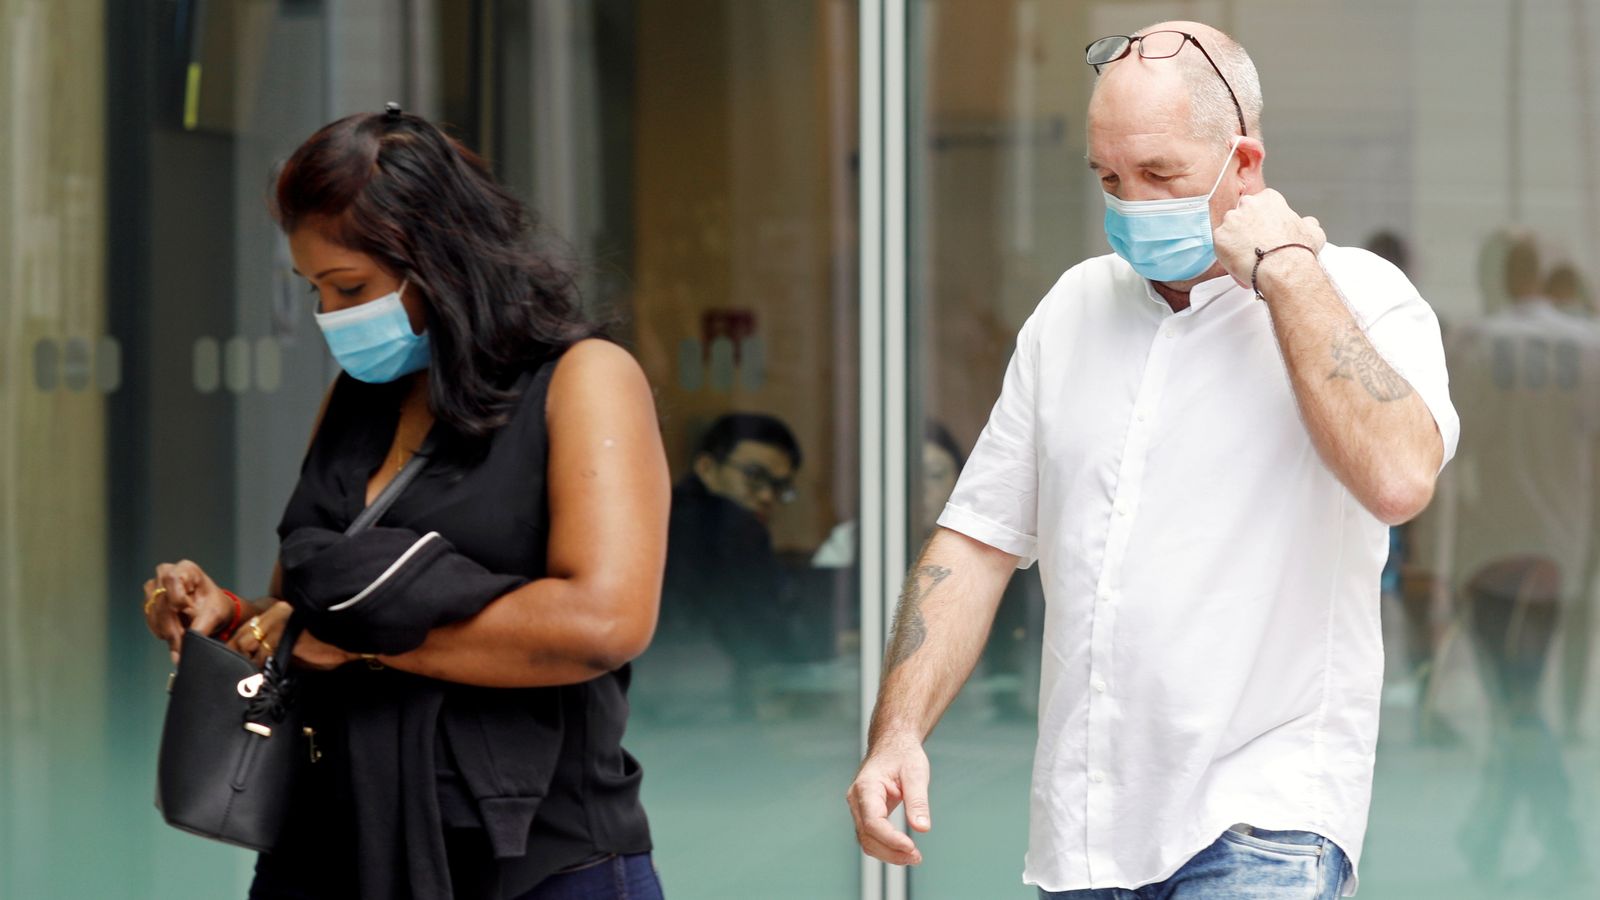 briton-jailed-for-sneaking-out-of-singapore-quarantine-hotel-room